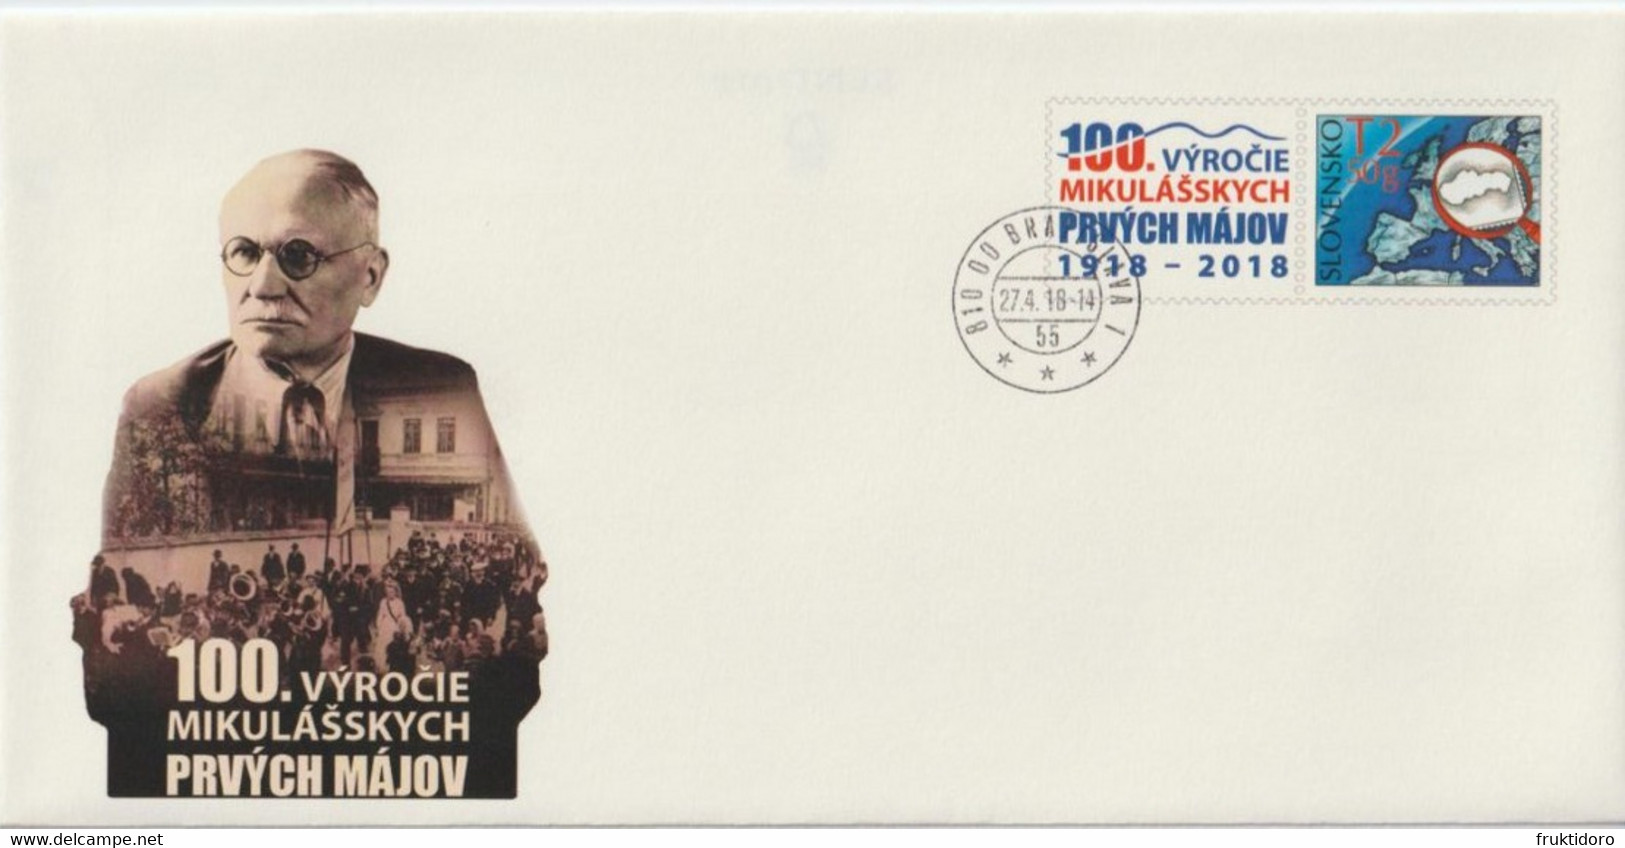 Slovakia Postal Stationery - 100th Anniversary Of The May 1st In L. Mikuláš - 2018 - Map - Magnifying Glass - Enveloppes